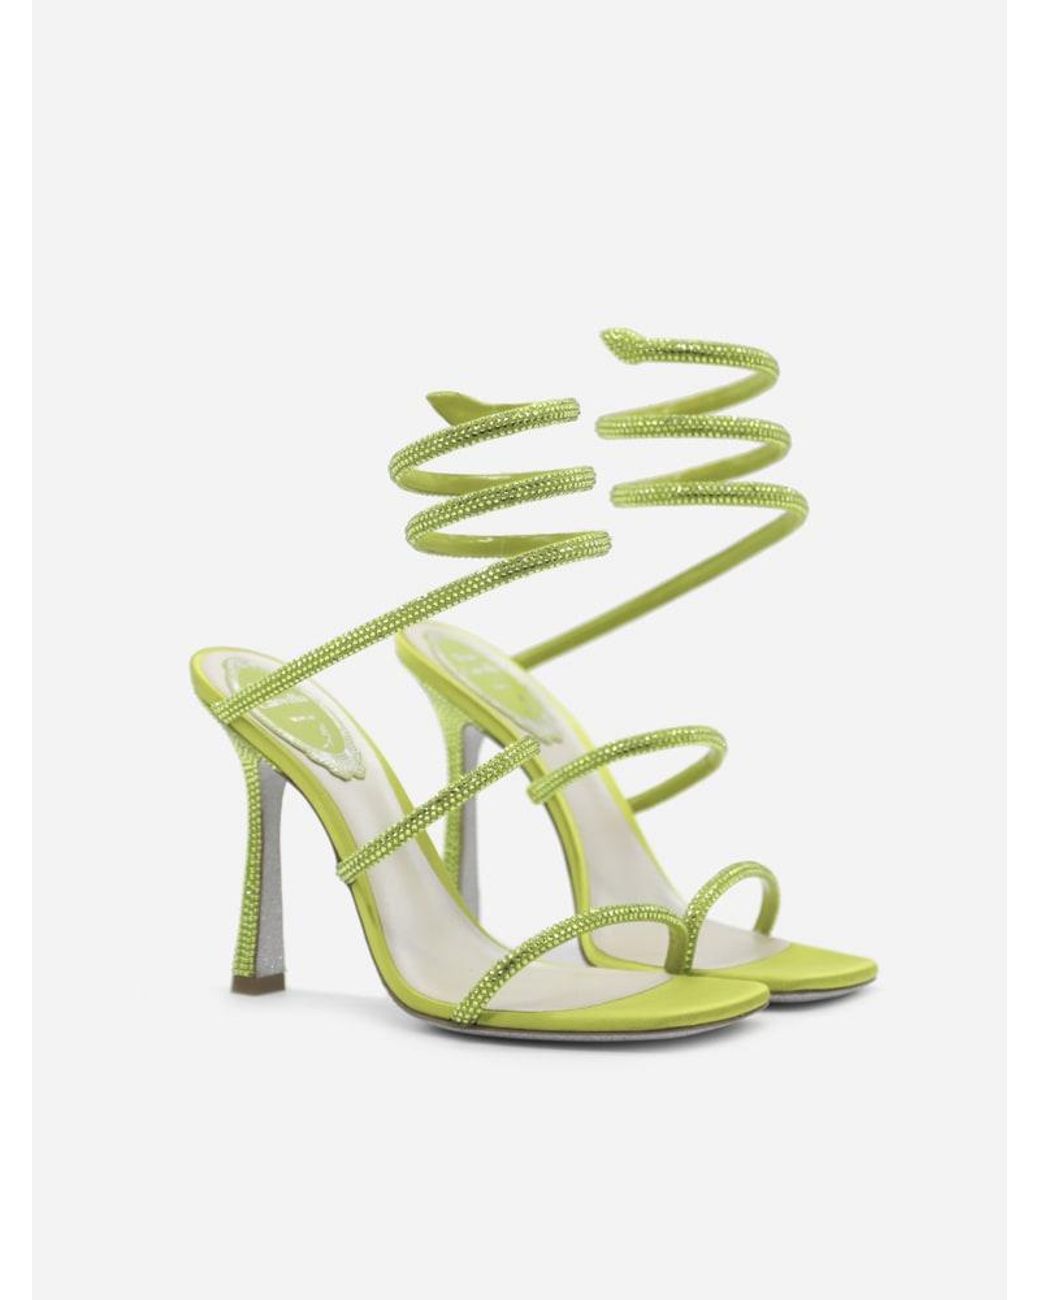 Rene Caovilla Cleo Sandals In Satin With All-over Crystals in Lime 